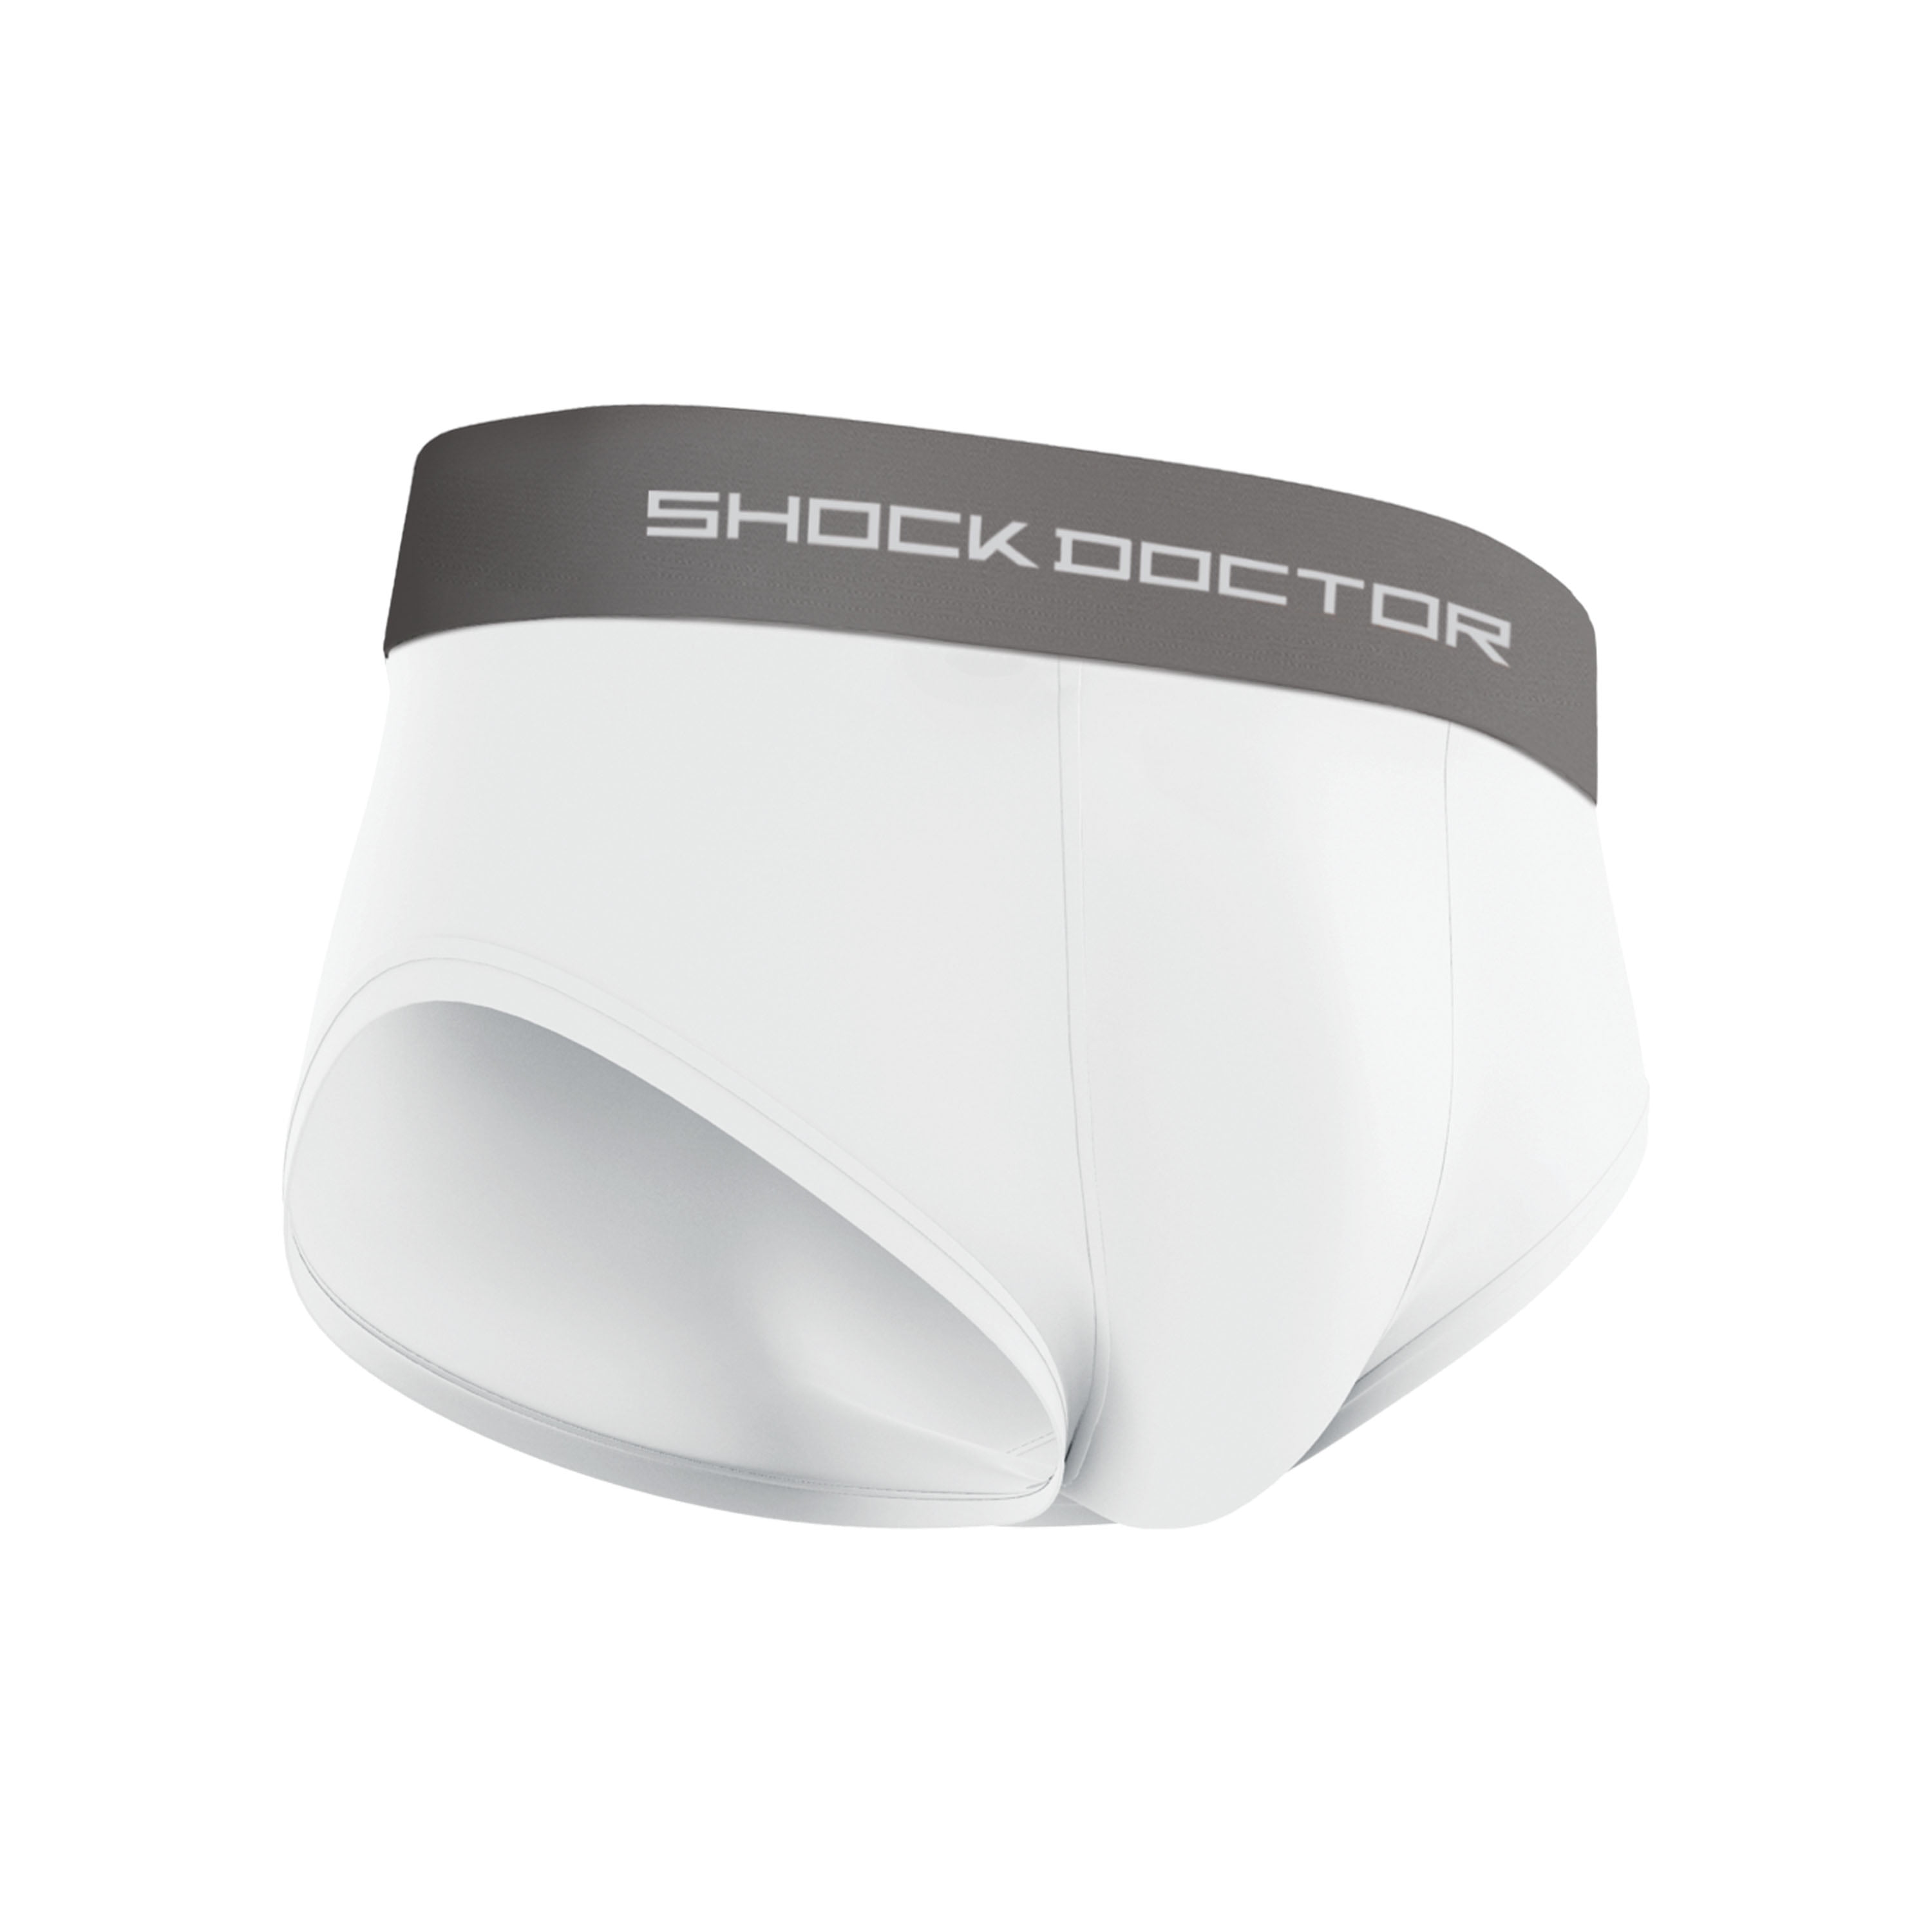 Shock Doctor Sport Brief With Cup Pocket, White, Youth Medium